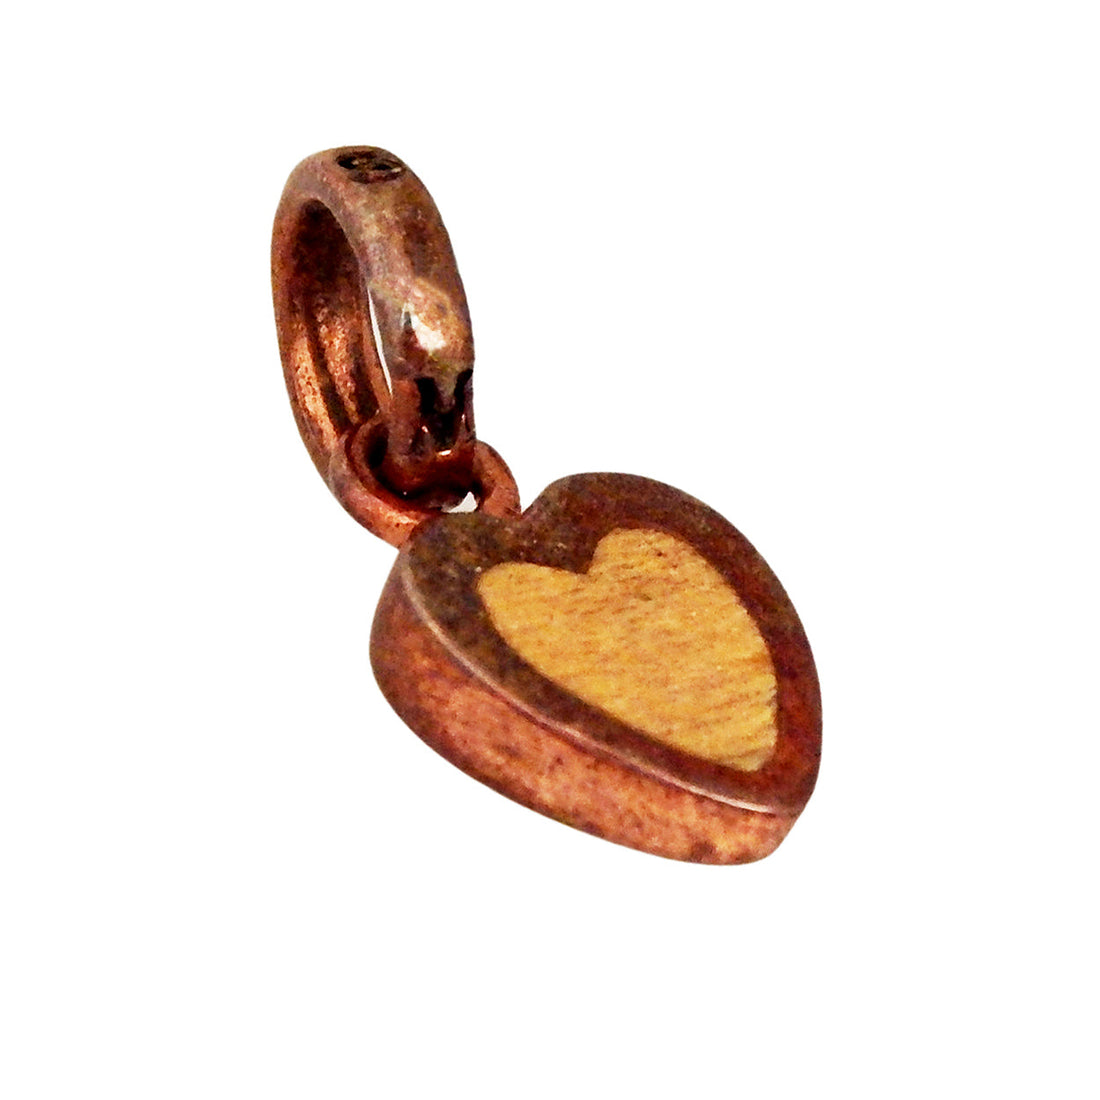 MARCOS - "MINI HEART PENDANT" in Copper with Inlaid Yellow Box Elder Wood